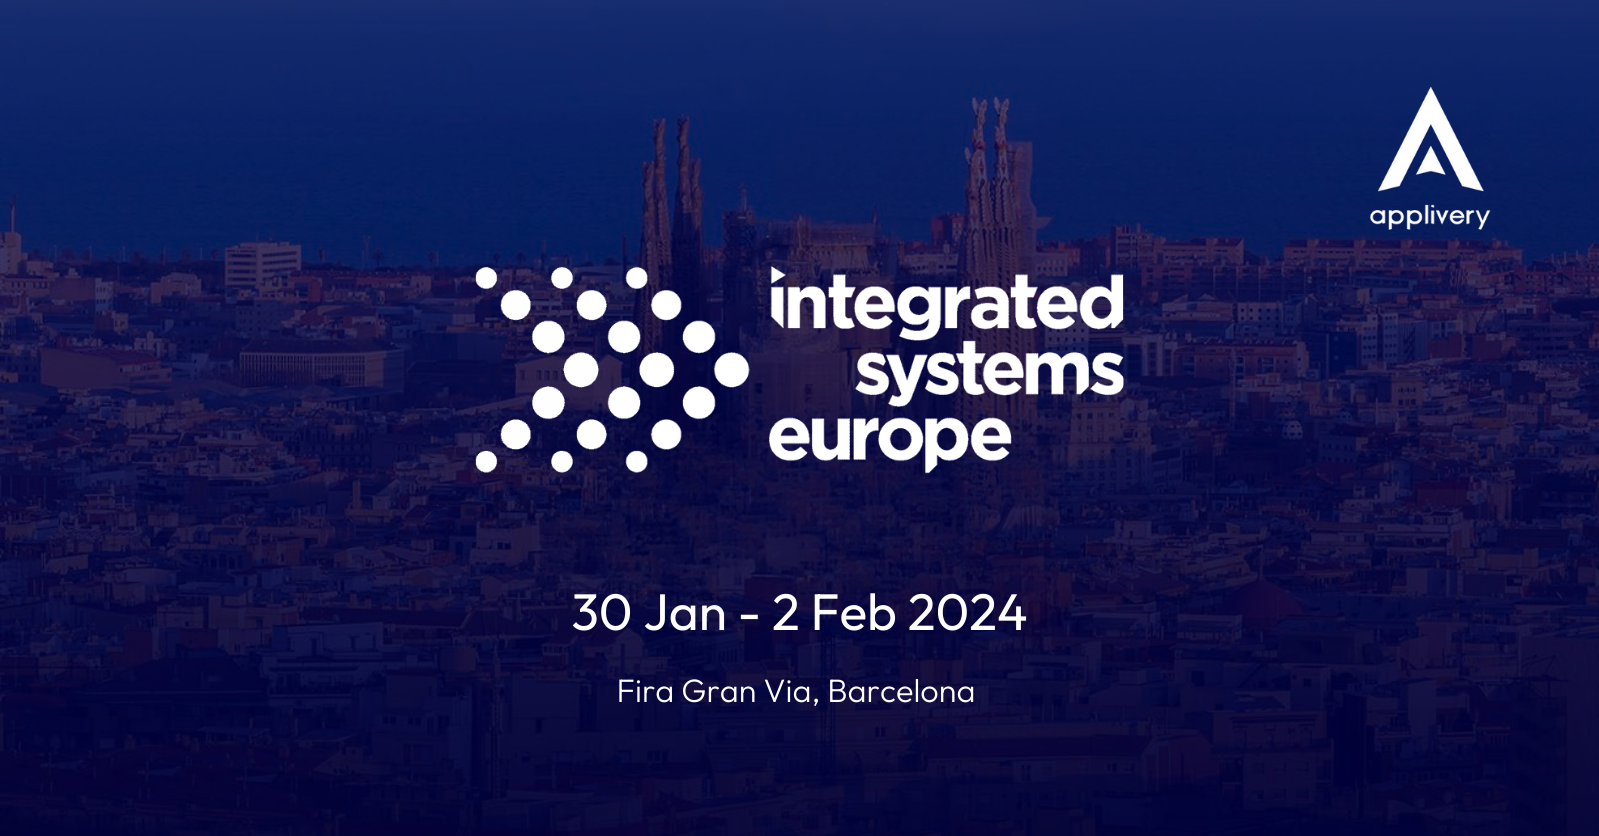 Applivery at ISE 2024 technology and innovation in Barcelona